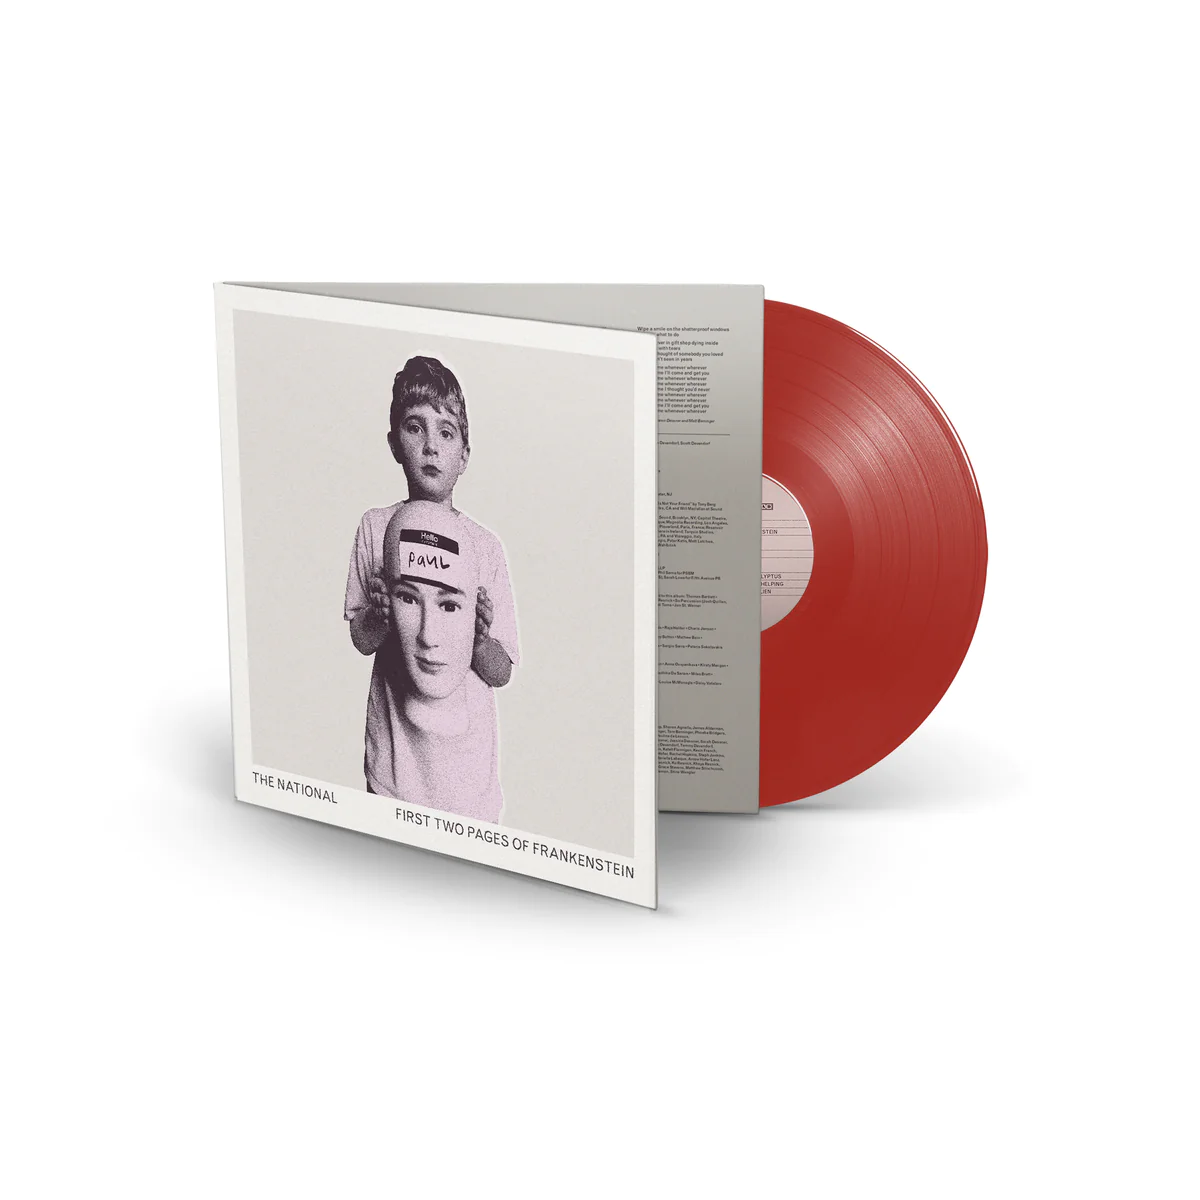 The National - First Two Pages of Frankenstein (Limited Edition Red Vinyl)